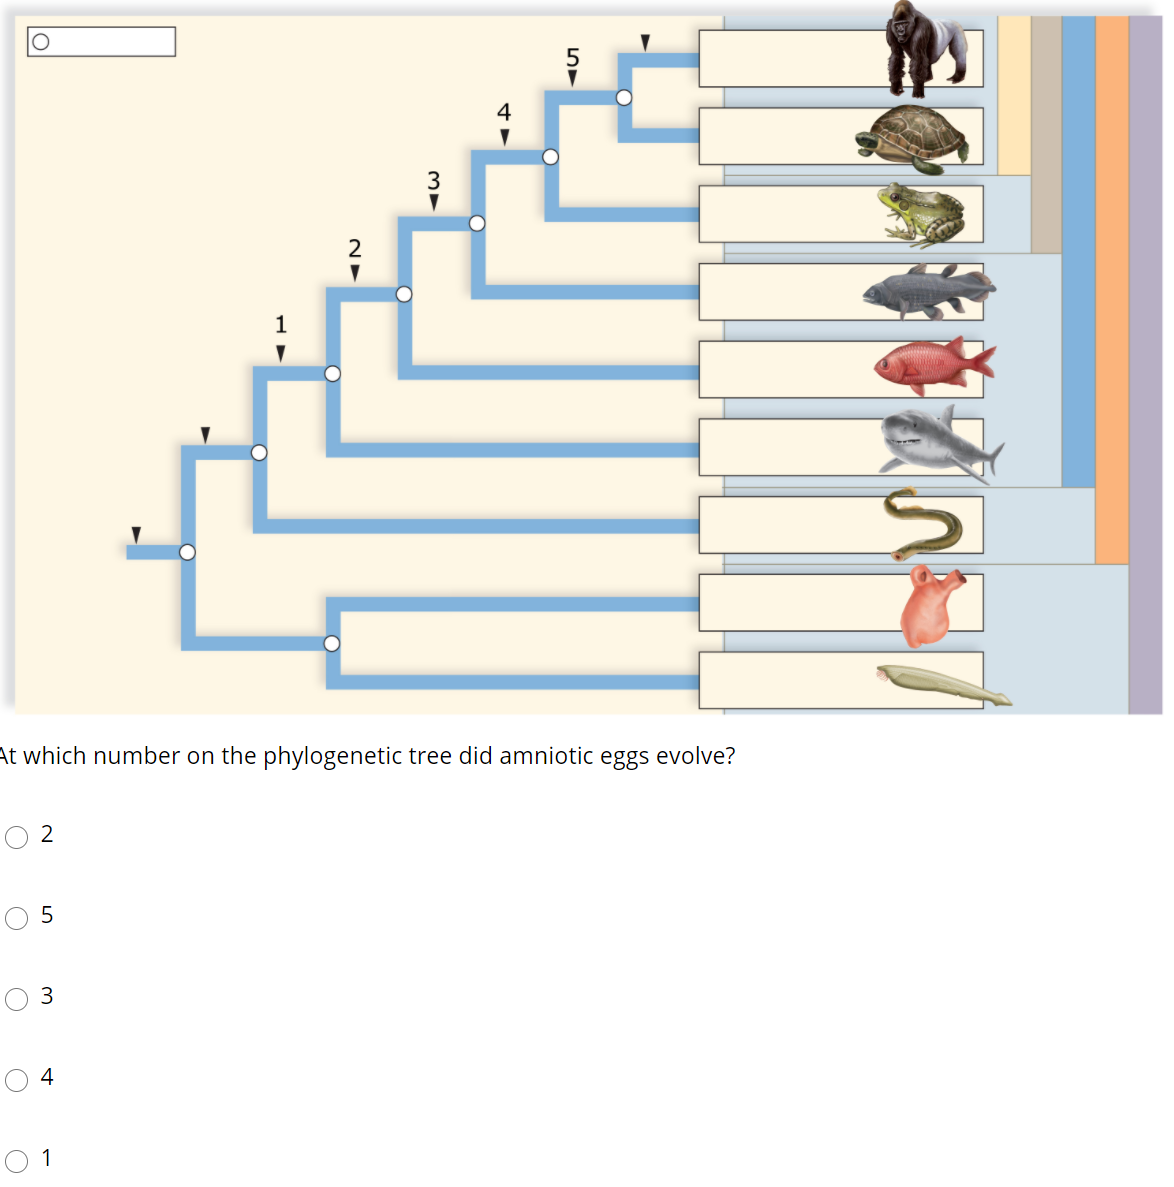 3
At which number on the phylogenetic tree did amniotic eggs evolve?
2
4
1
3.
